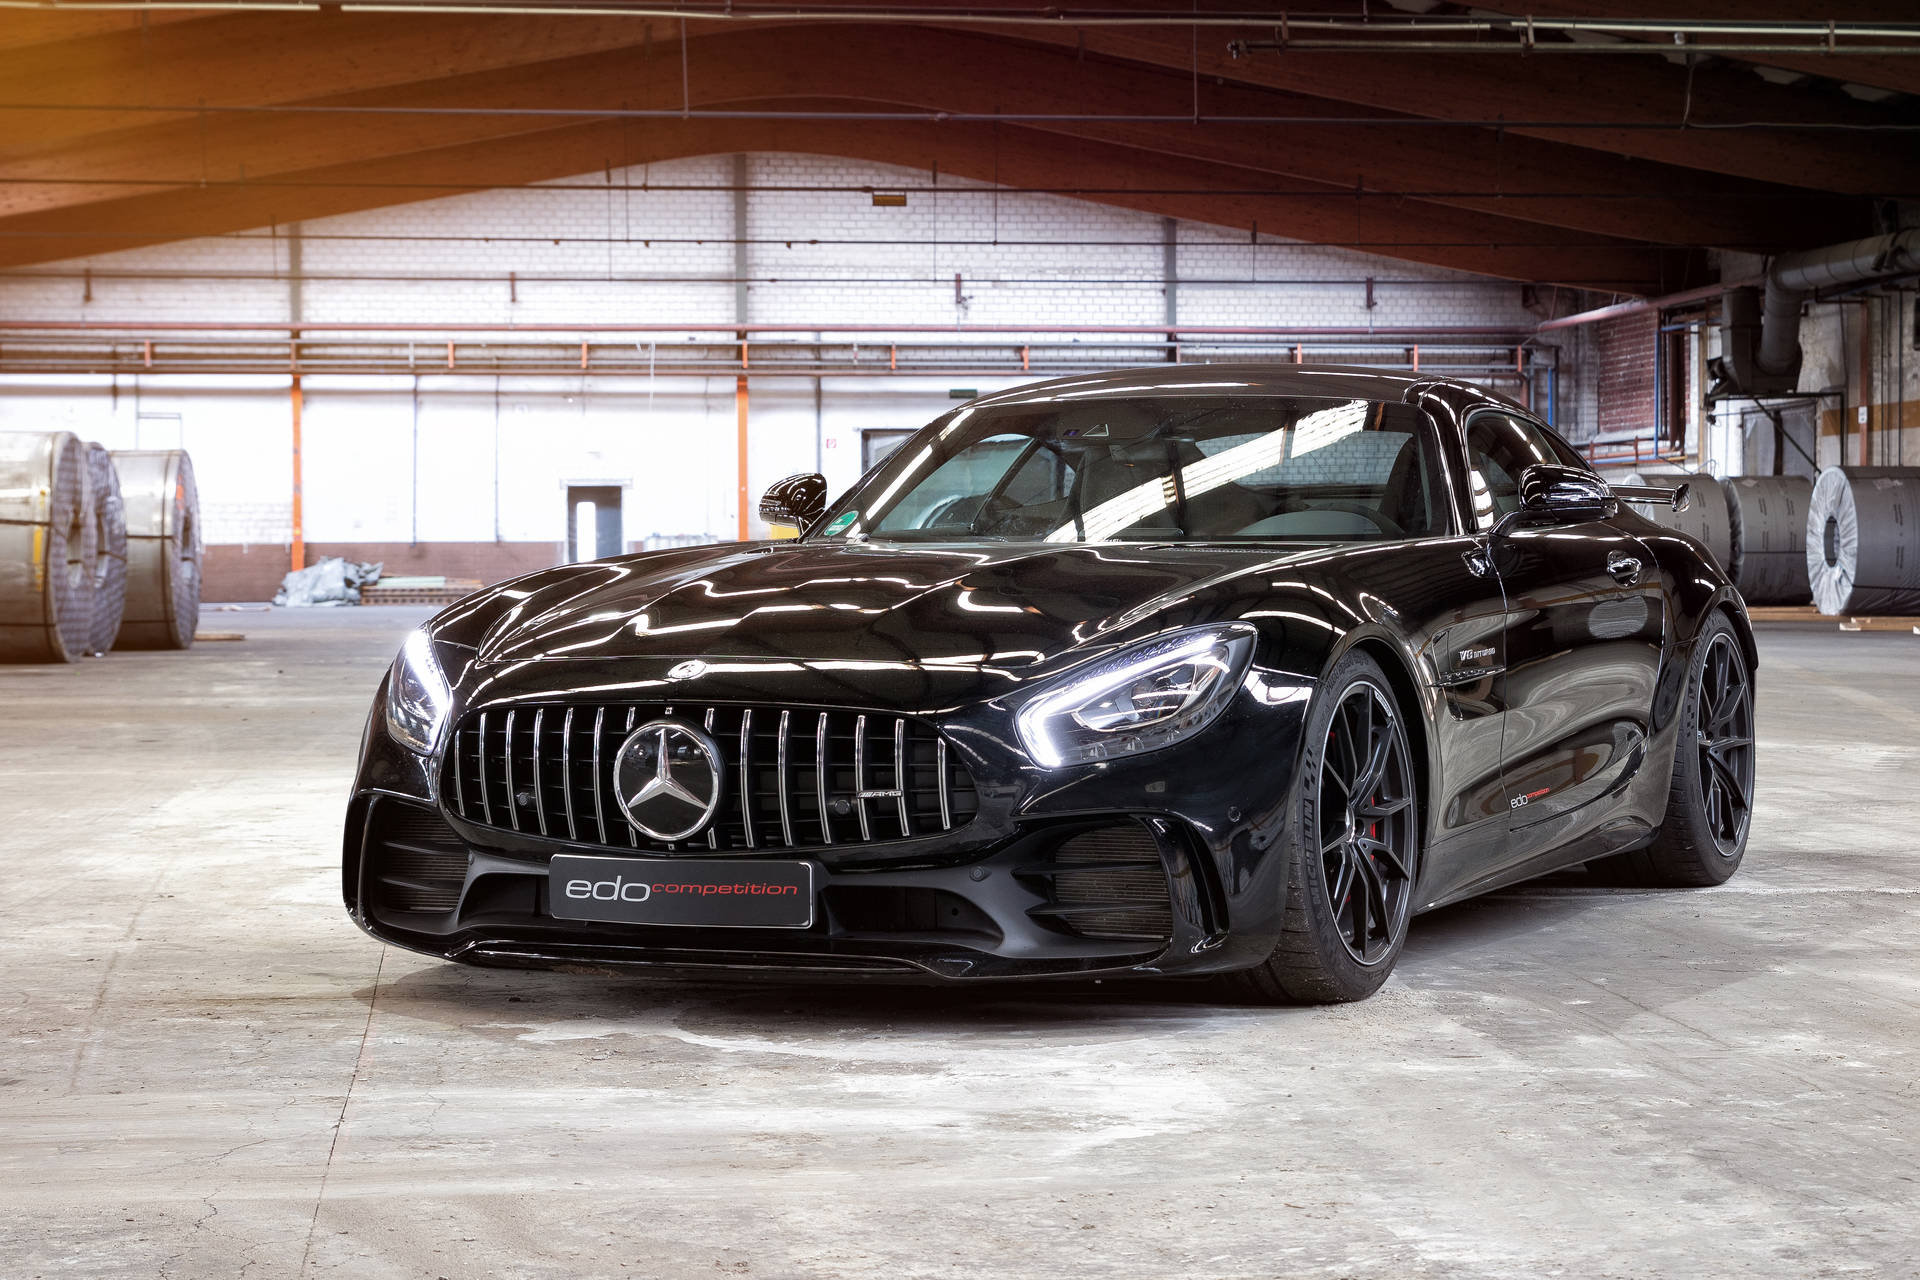 Sleek And Luxurious Black Amg Gtr Showcasing Absolute Power And Class Background